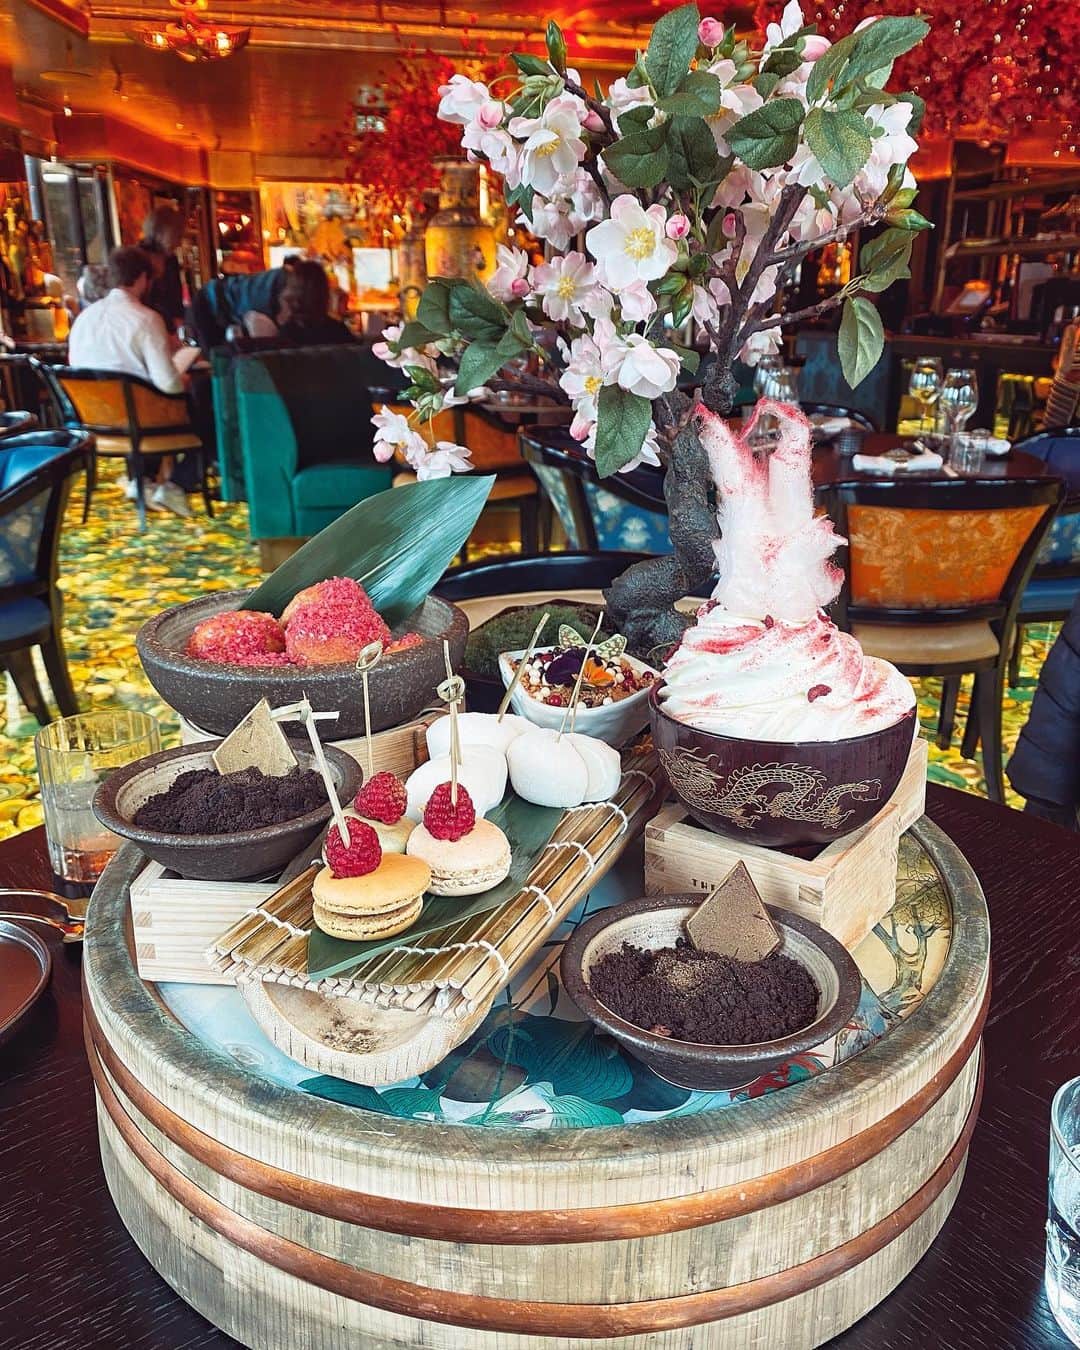 LIKARANAIさんのインスタグラム写真 - (LIKARANAIInstagram)「Came to Ivy Asia to try their new cherry blossom cocktails and dessert yesterday 🌸 We had an absolutely amazing experience, the food was so tasty and service was great!  We started off the delicious cocktails “ Blossom Royale “ and “ Hana Harmony “from their Blossom Season Specials 🍸 ✿ Blossom Royale : Roku Gin, raspberries, citric and cherry blossom syrup, topped with Champagne ✿ Hana Harmony : Hibiki Harmony Japanese whiskey & Peach and Pomelo Liqueur, twist on a sour  We shared Kimchi fried rice, prawn tempura🍤 and Char Siu pork belly for lunch. The pork belly just melts in your mouth 😋 it’s amazing !!  And to finish, we shared the Cherry Blossom dessert platter and it’s honestly a MUST have 🌸🌸🌸 never had anything like it before ! The warm passion fruit cherry doughnuts with white chocolate dip for dessert were sublime !! Love the yuzu cheesecake and the ice cream with candy floss too 🍧 It was so good 💗💗💗 The dessert platter will be available from tomorrow Friday, 24th March until Friday 12th May. Don’t miss it 🌸  Thank you Ivy Asia, everything was amazing and cannot wait to return!!  *PR Invite #TheIvyAsia #TheIvyAsiaGuildford #SakuraSeason #BlossomNights  。 。 。 。 。 。  #guildford #surrey #londonfoodscene #londonfoodspots #londonfoodgram #japanesecuisine  #london #visitlondon #londontravel #explorelondon #discoverlondon #england #uk #londoncitylife #lovegreatbritain #beautifulengland #likeforlikes #shoutout #girlstravel #travel #コメント返し #写真好きな人と繋がりたい #カメラ好きな人と繋がりたい」3月30日 19時20分 - likaran